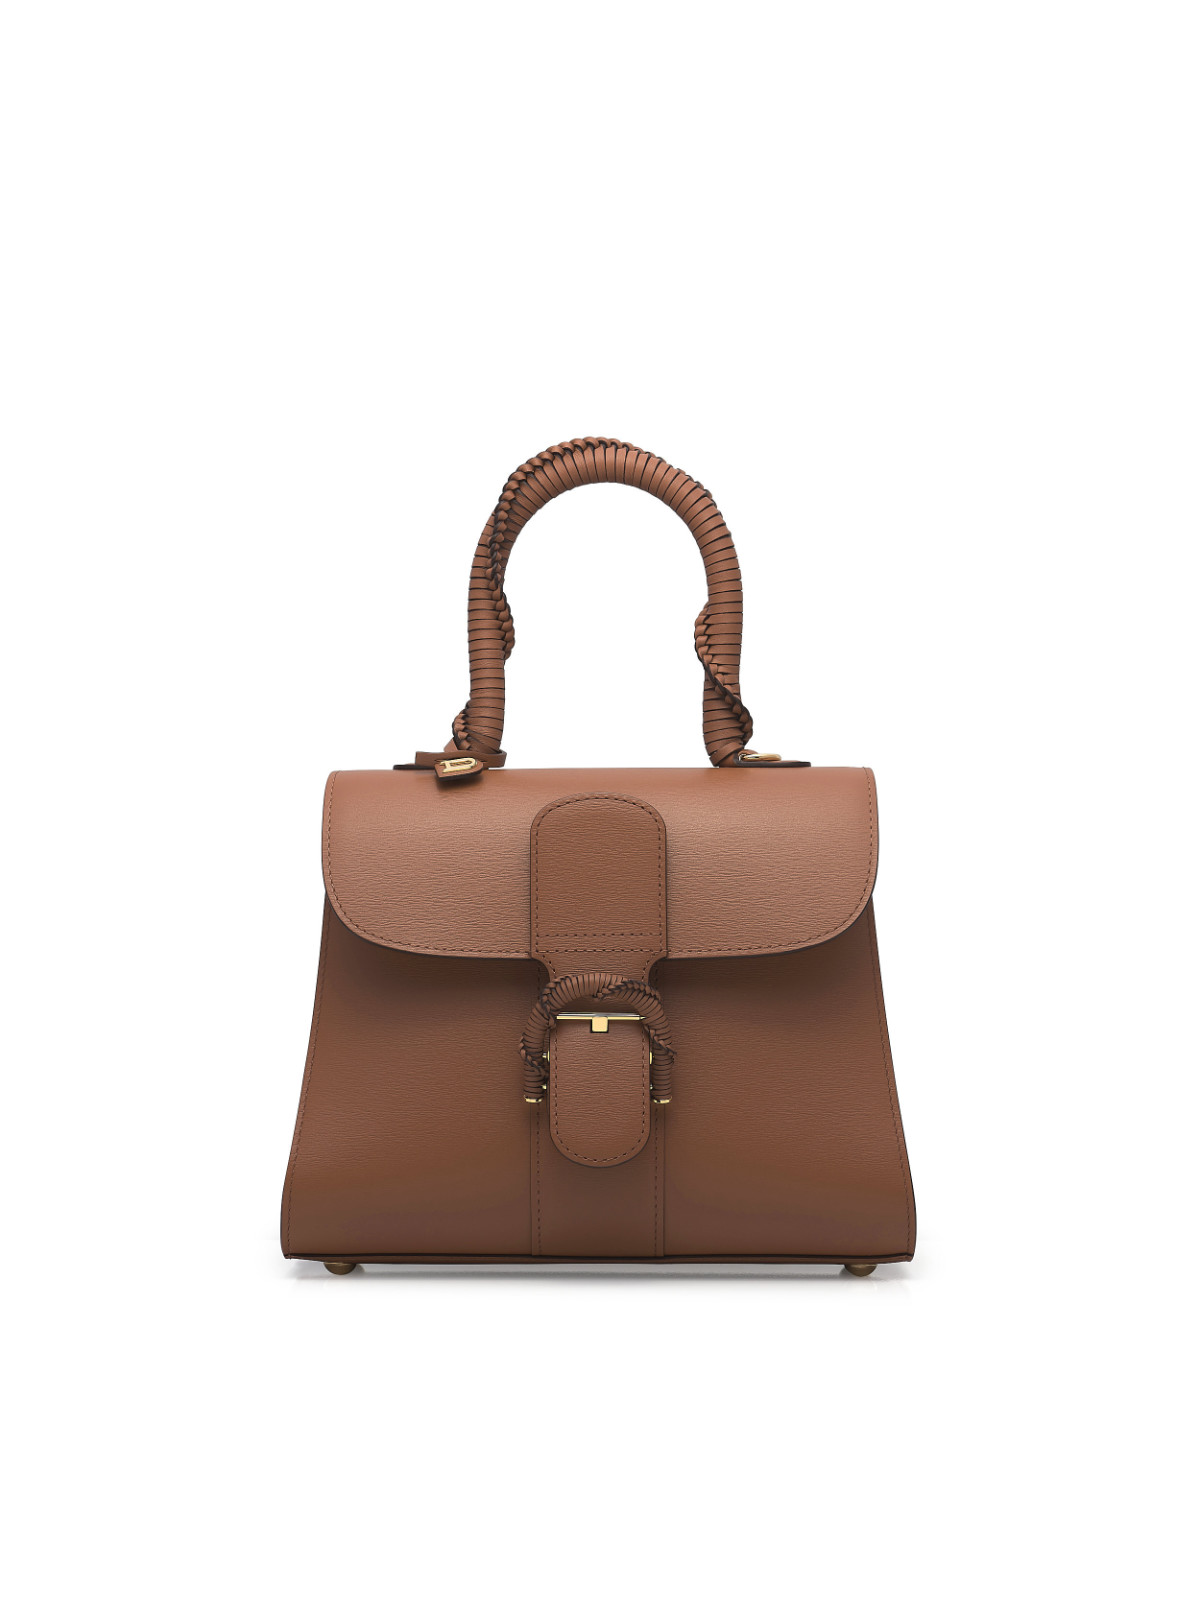 Delvaux Brillant MM Light And Shadow Box Calf Limited Edition